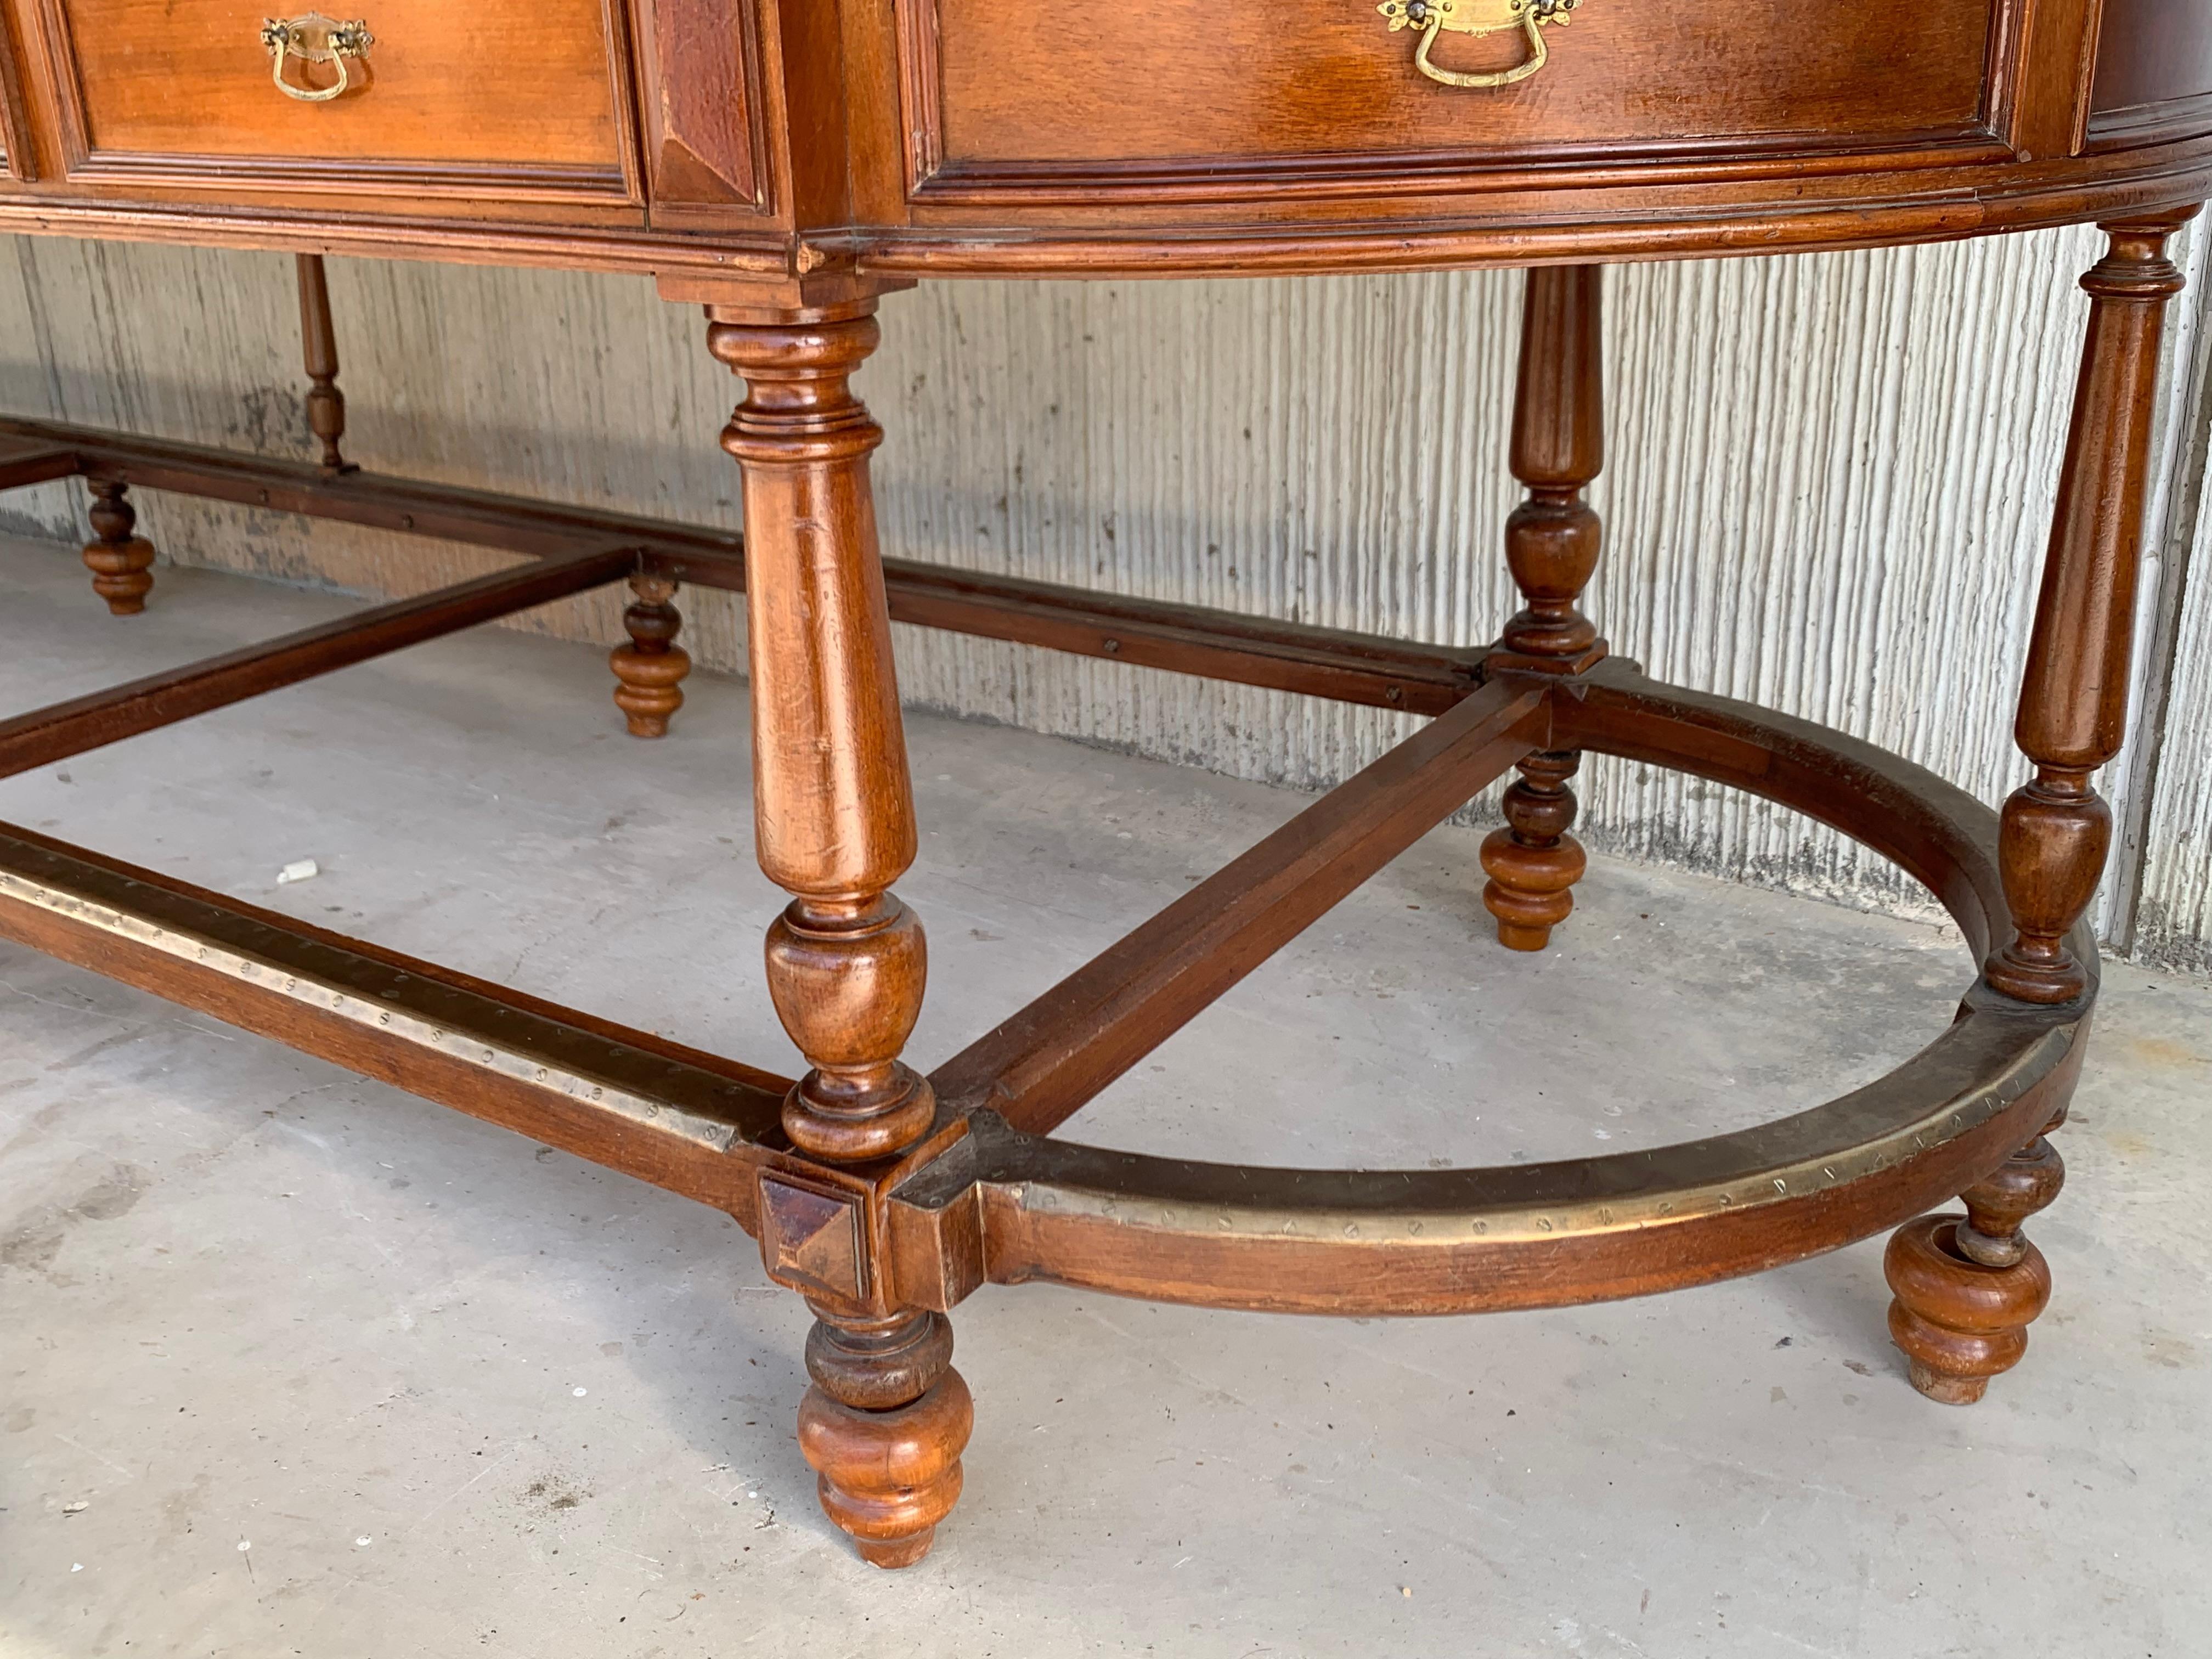 12 Foot Oval Center Table with Drawers in Both Sides, 20th Century For Sale 2